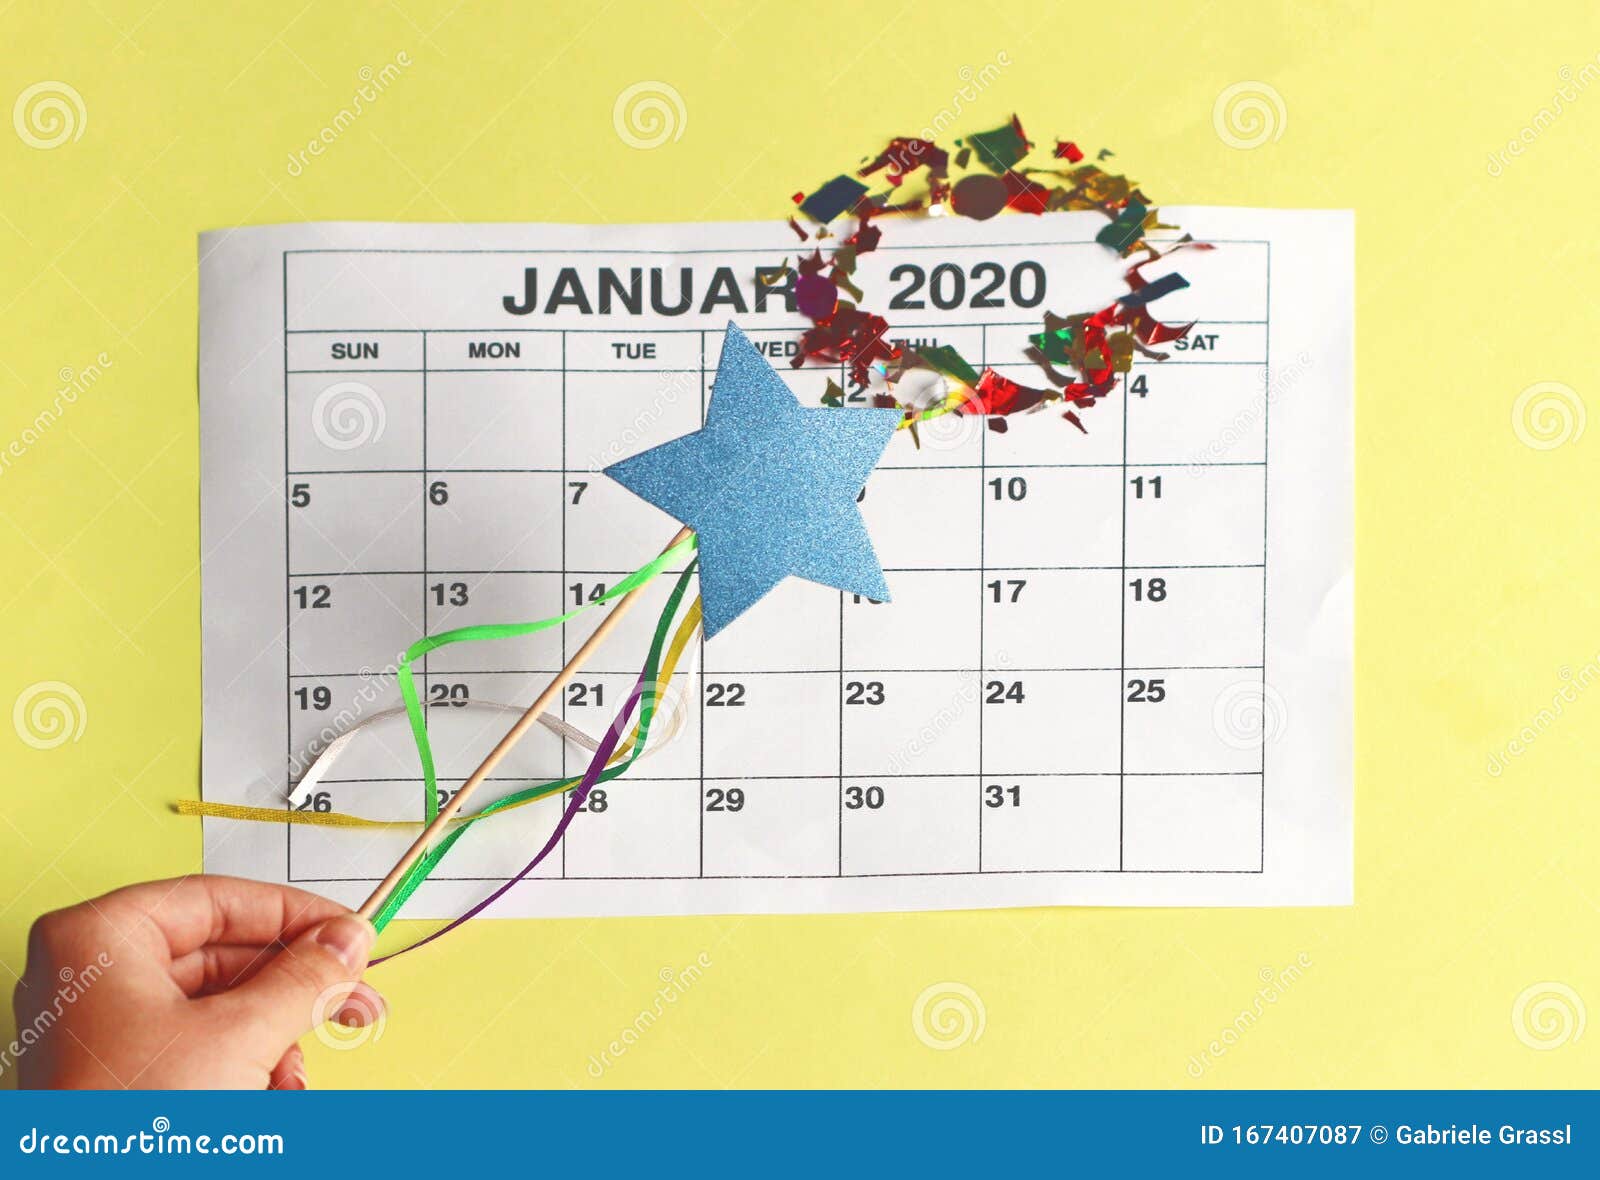 Download Fairy Godmother Touching A Calendar Page Of 2020 With Her Wand Stock Image - Image of confetti ...